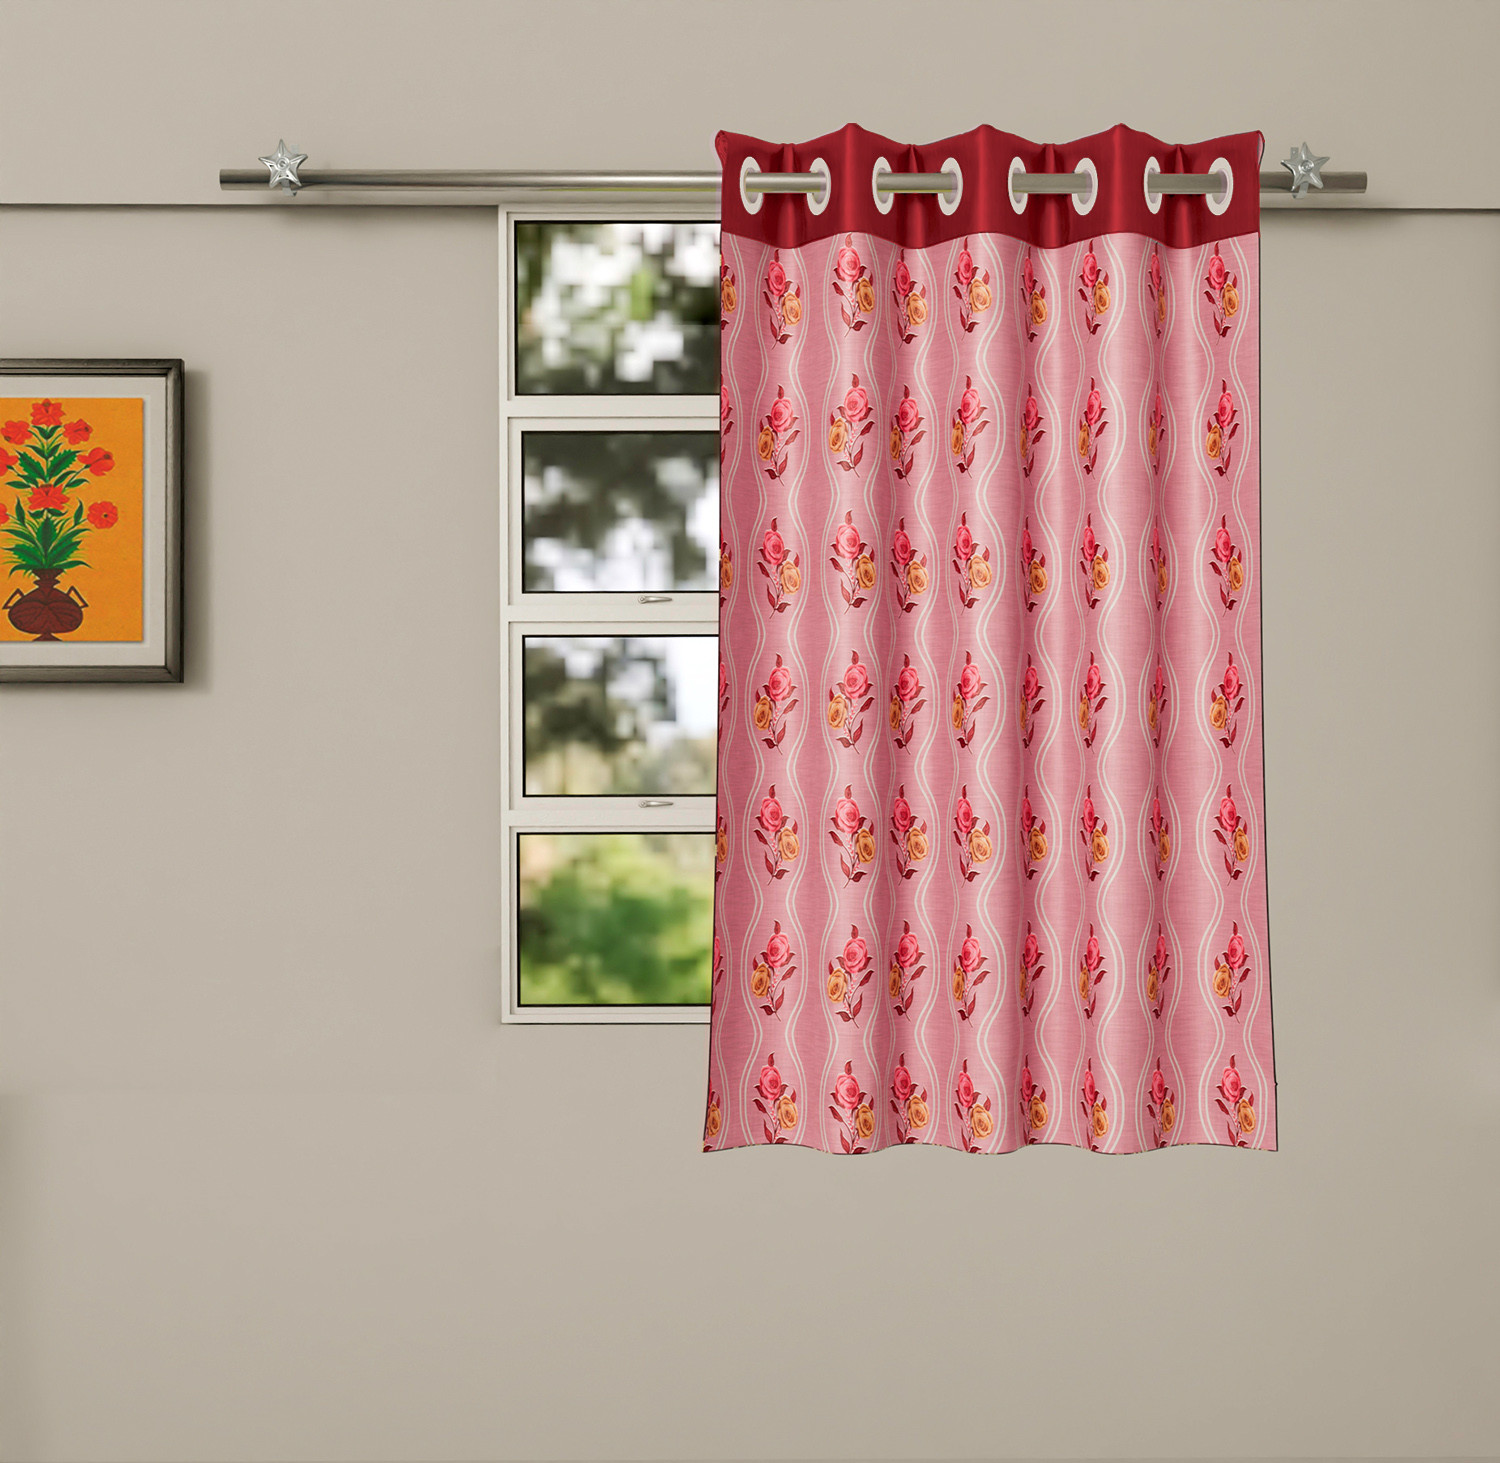 Kuber Industries Polyester Decorative 5 Feet Window Curtain | Rose Print Darkening Blackout | Drapes Curtain With 8 Eyelet For Home & Office (Pink)